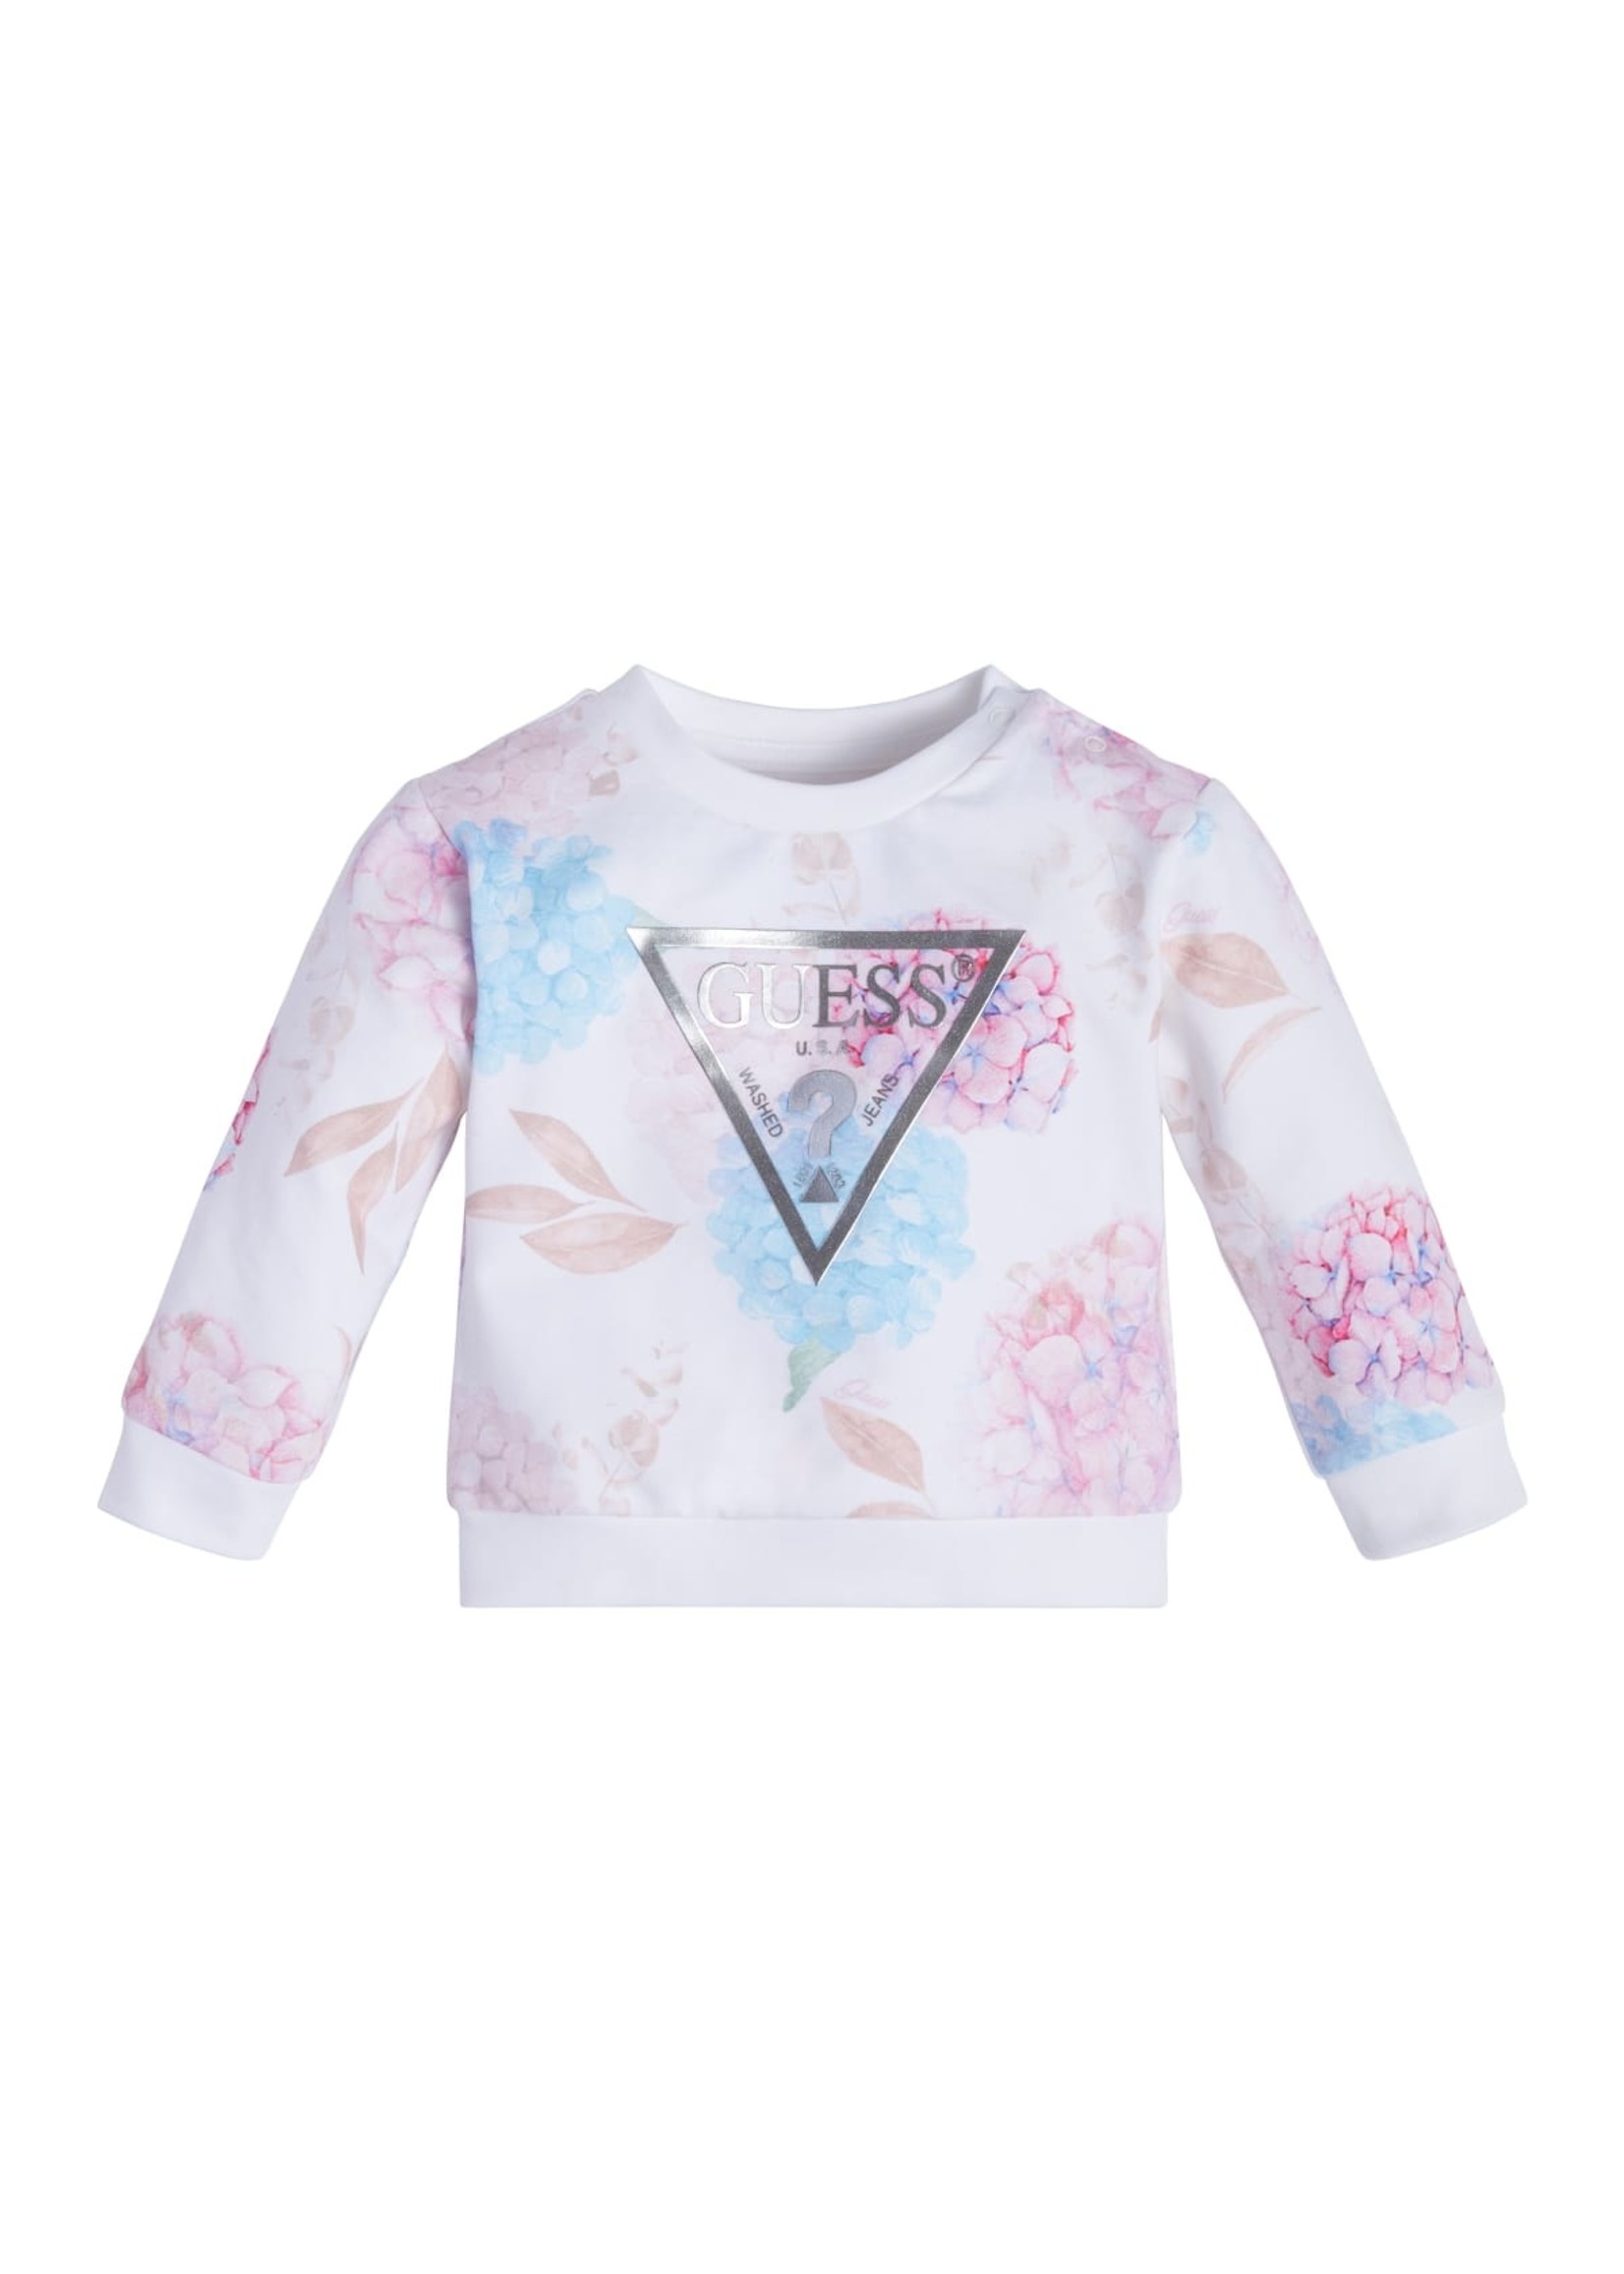 Guess LS ACTIVE TOP FLOWERS PINK WHITE